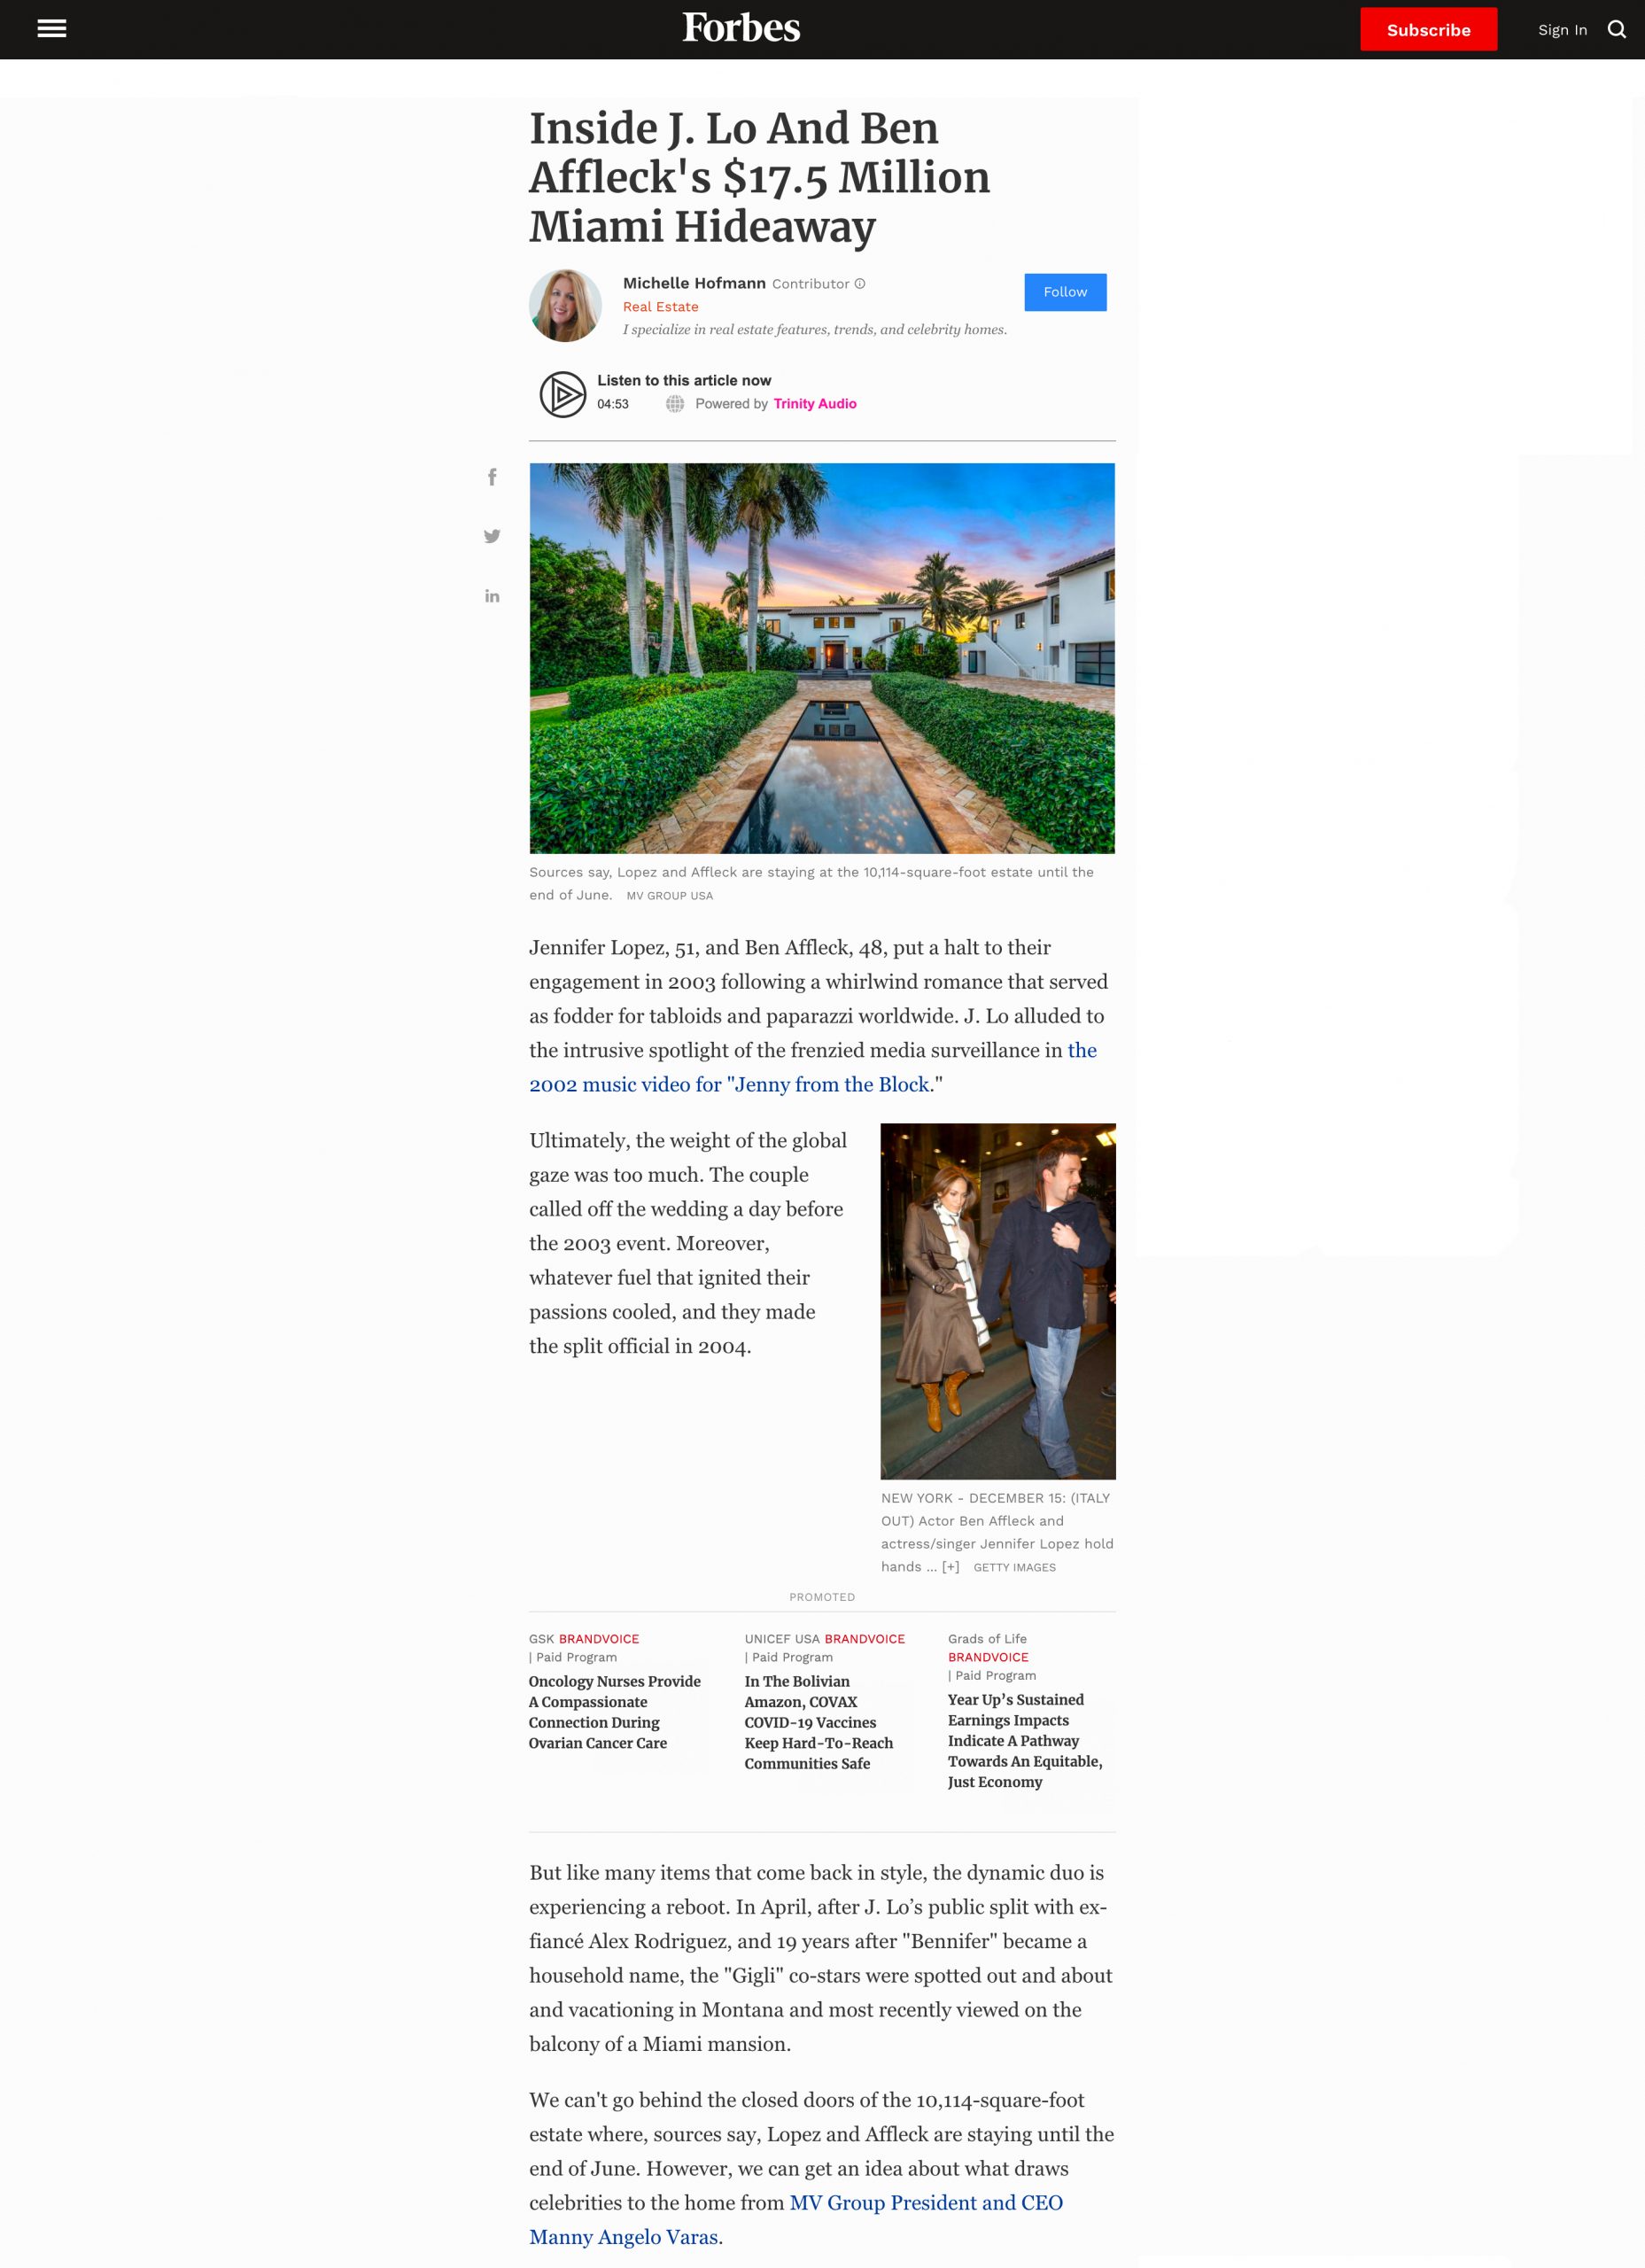 Forbes – Inside J. Lo And Ben Affleck’s $17.5 Million Miami Hideaway